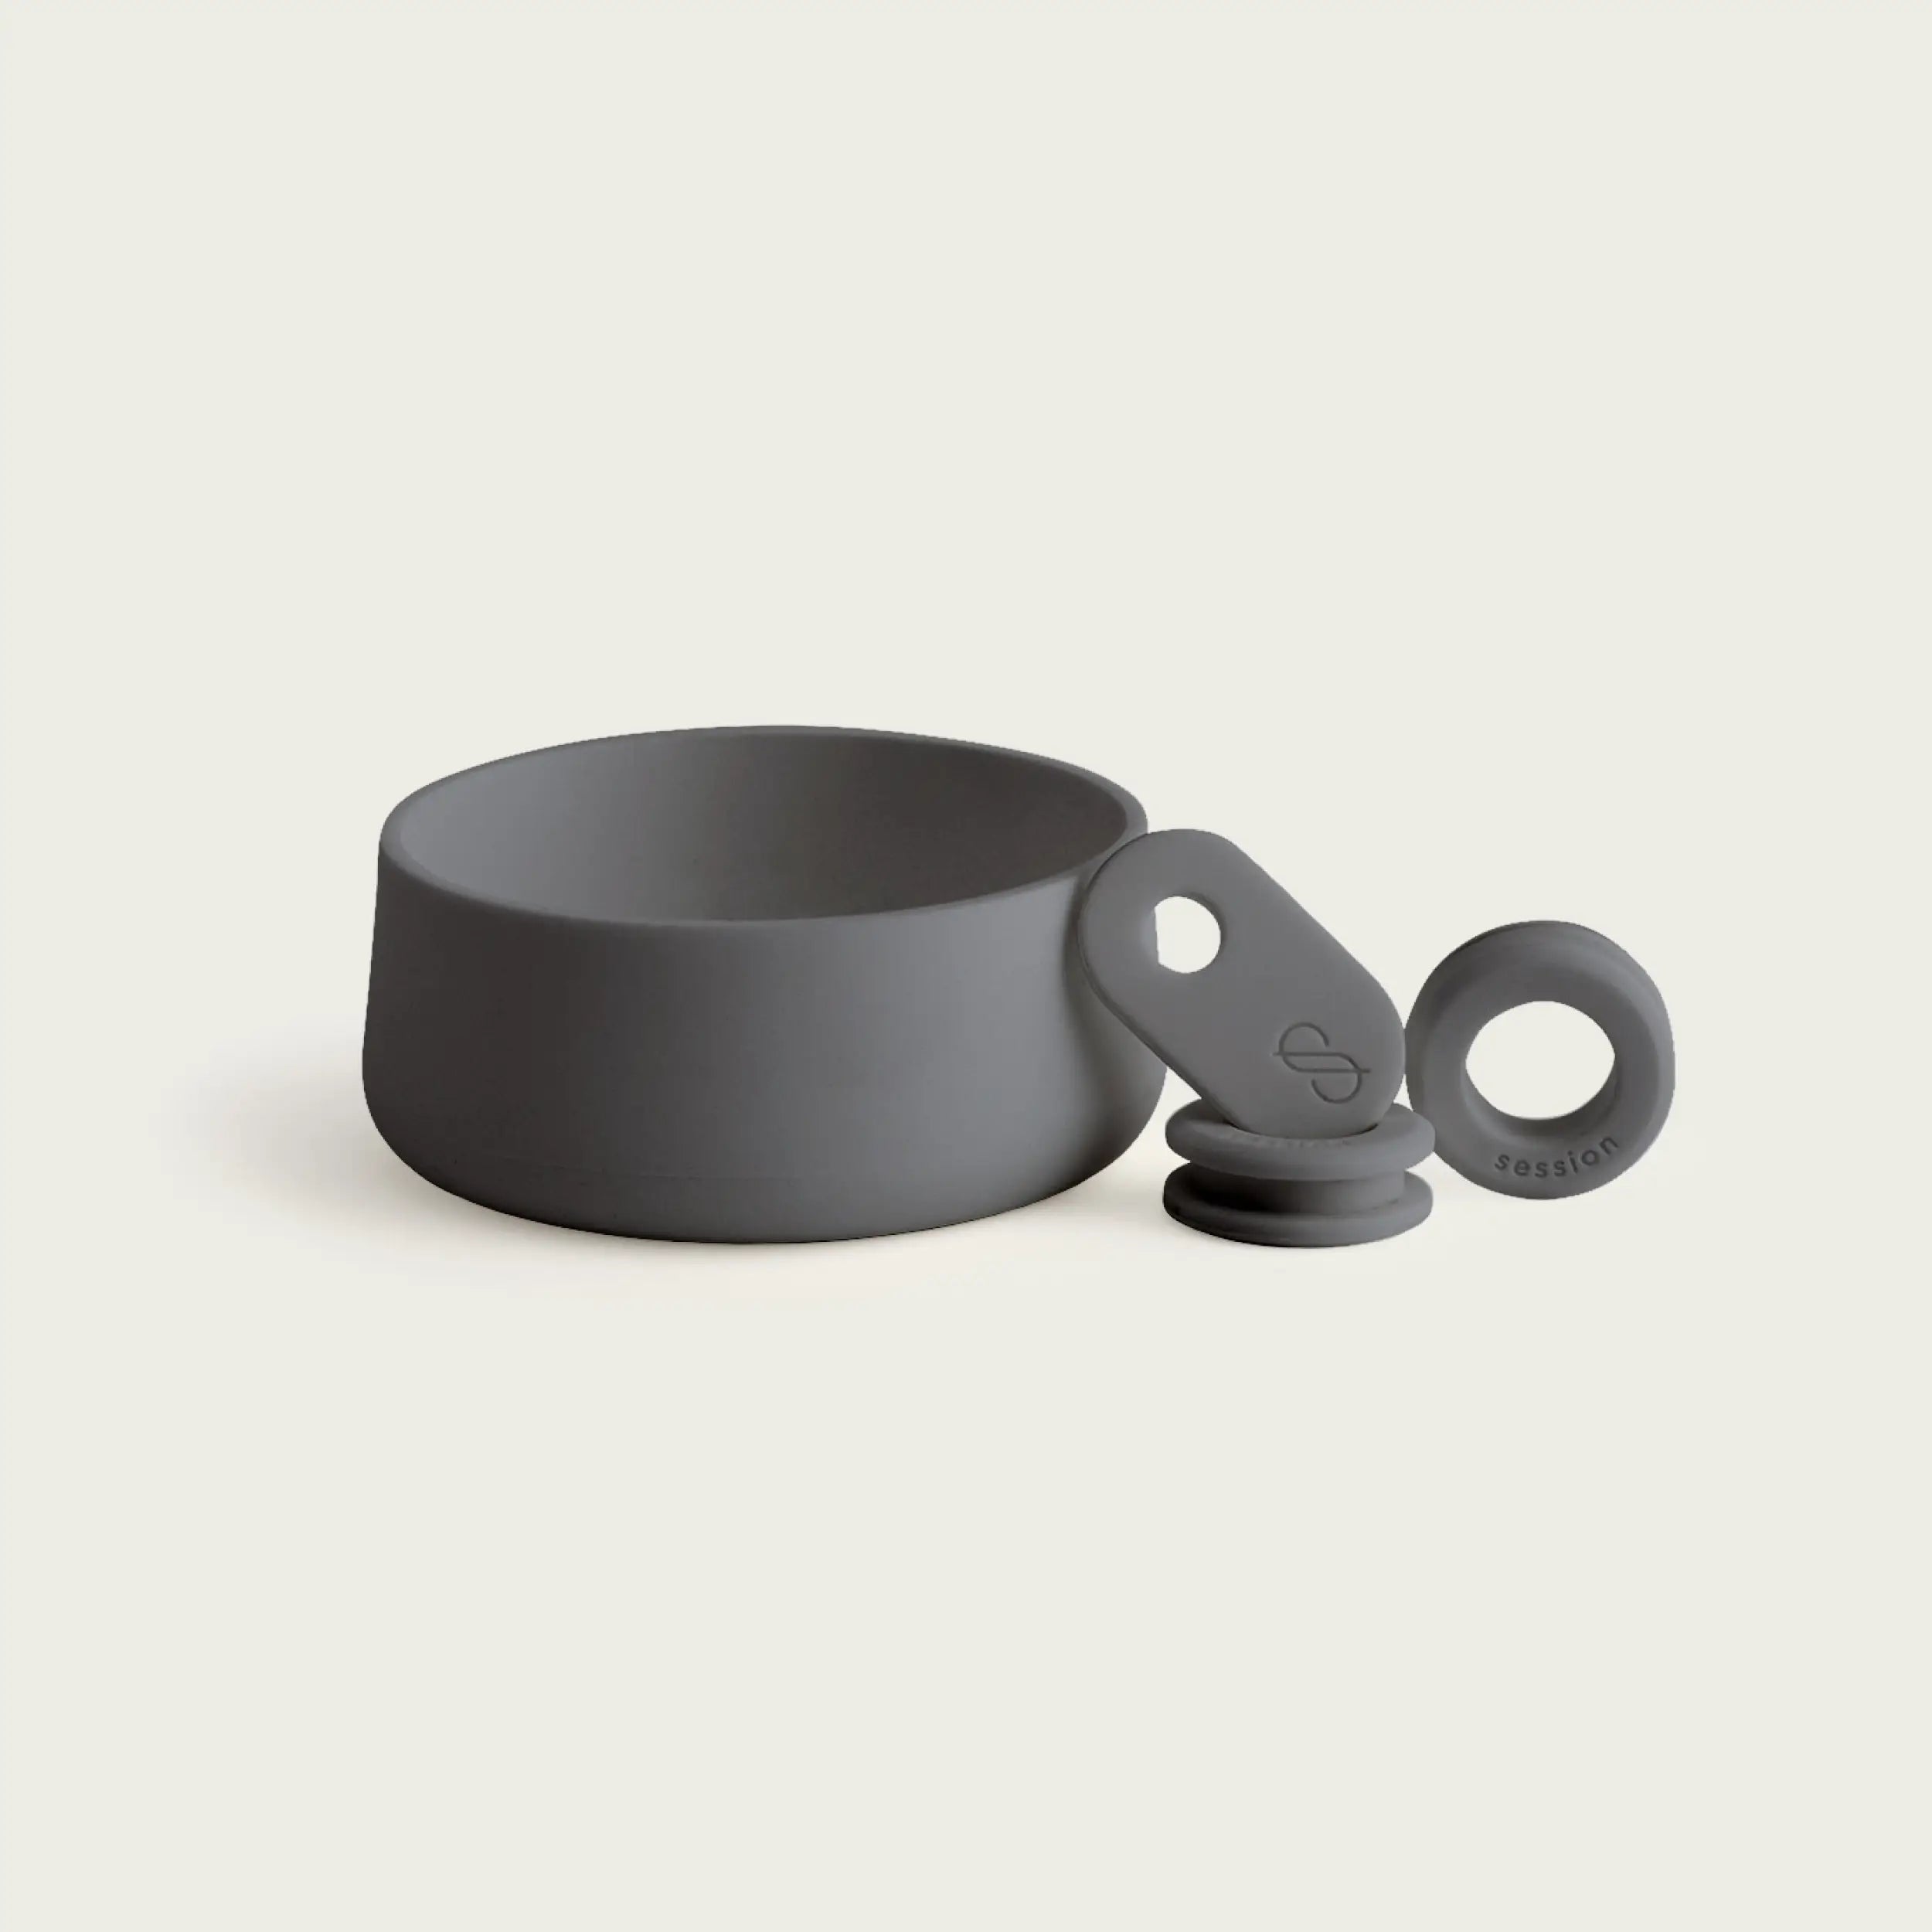 Ring Clip Holder Charcoal